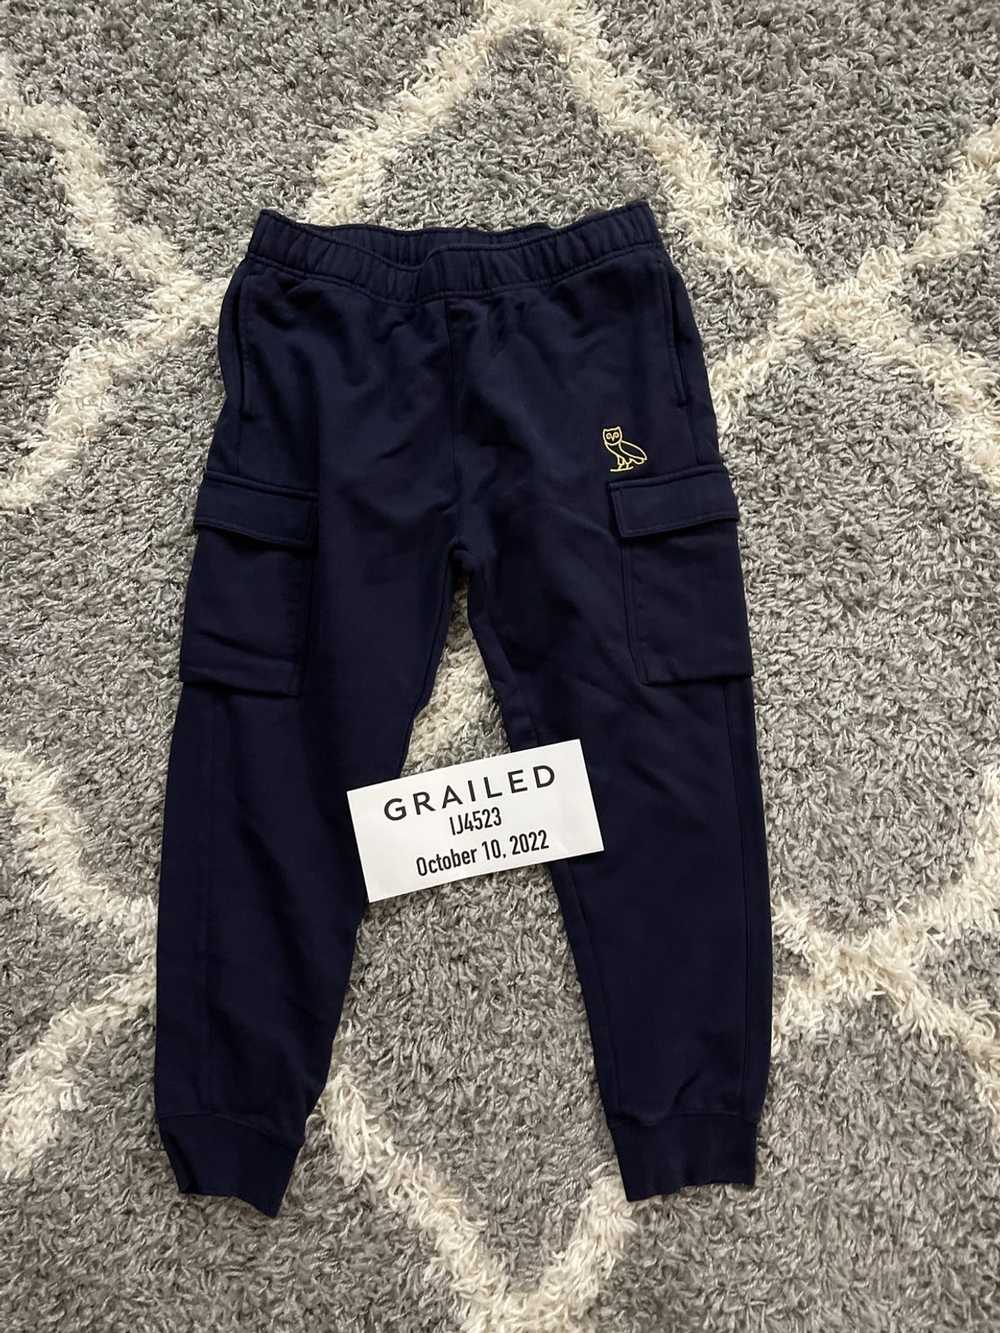 Octobers Very Own OVO Octobers Very Own Navy Jogg… - image 1